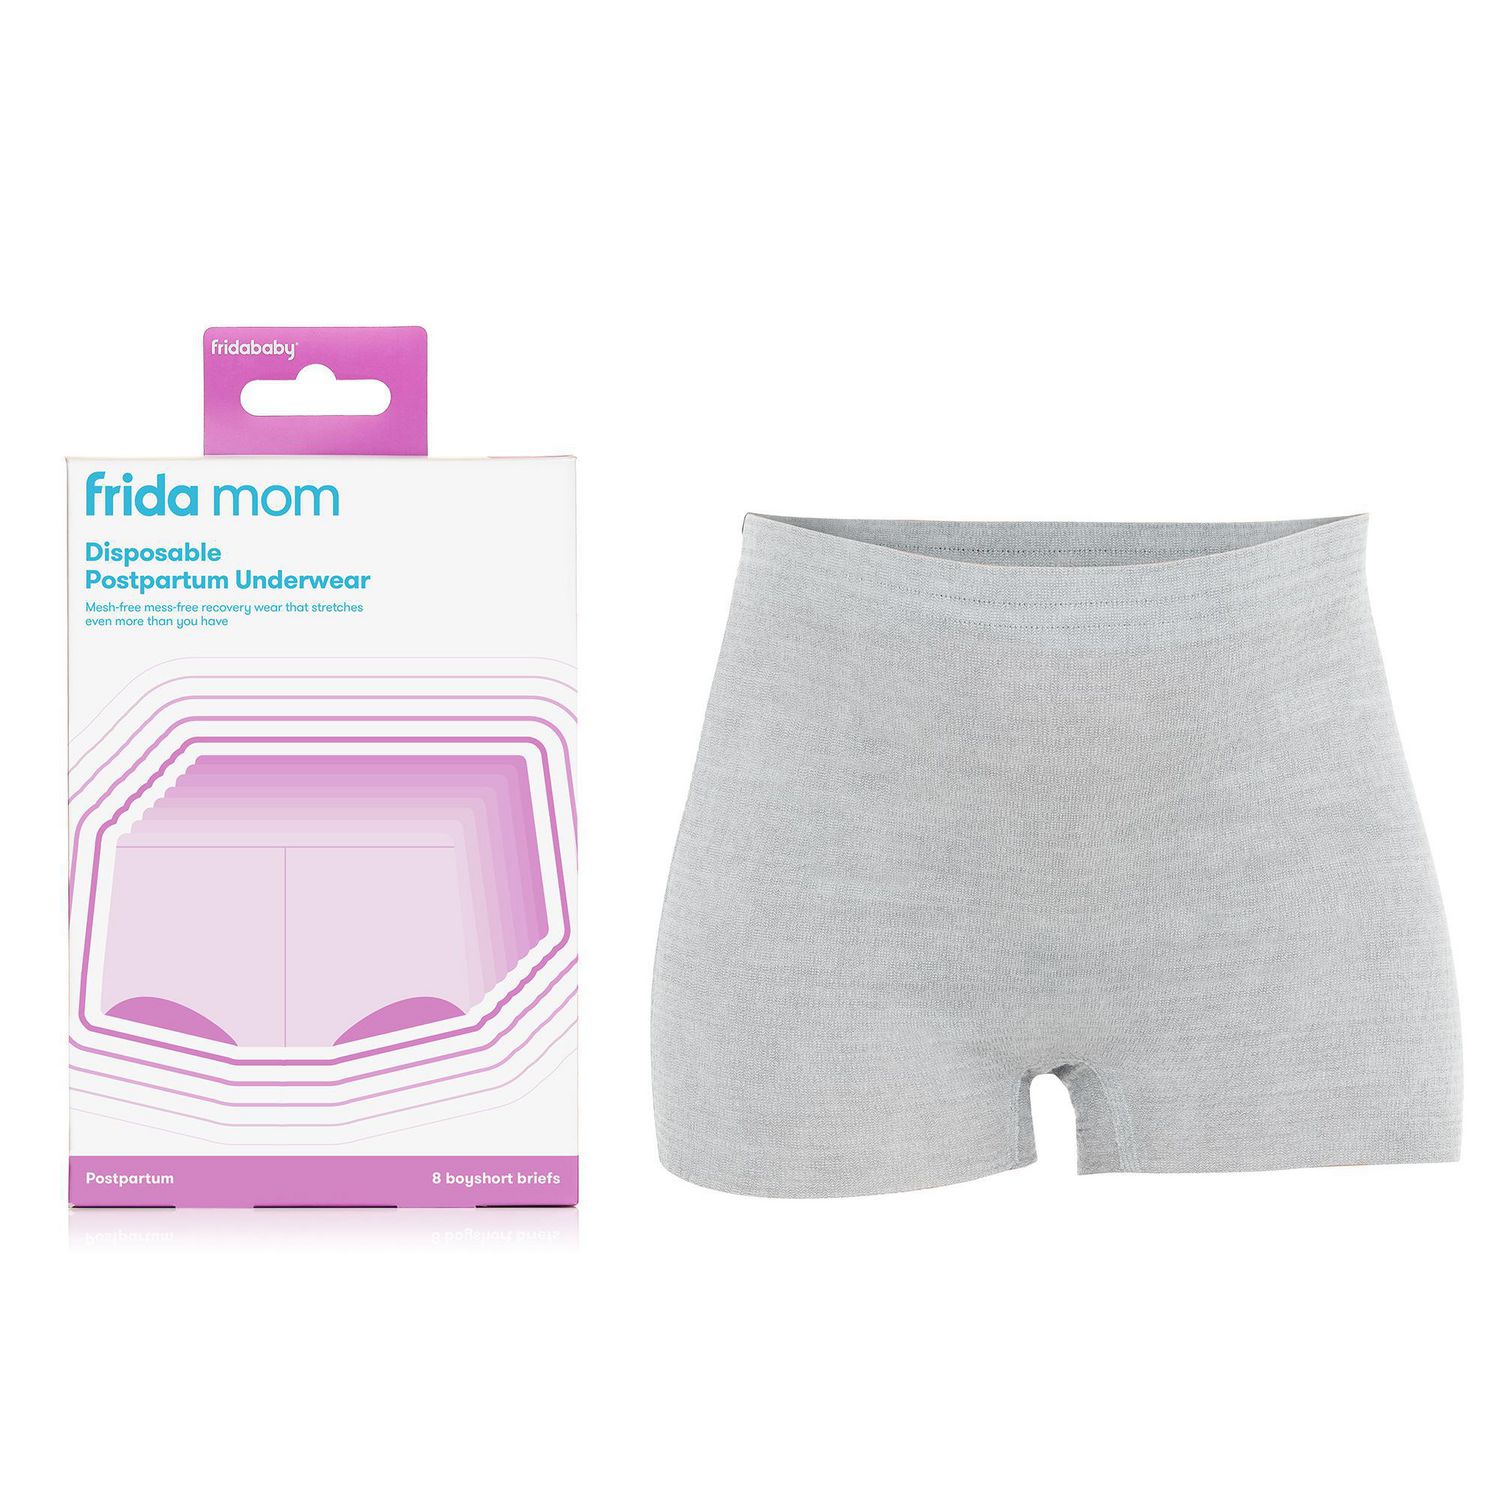 CARER Healthcare Mesh Underwear for Incontinence and Postpartum Recovery -  8 Pack